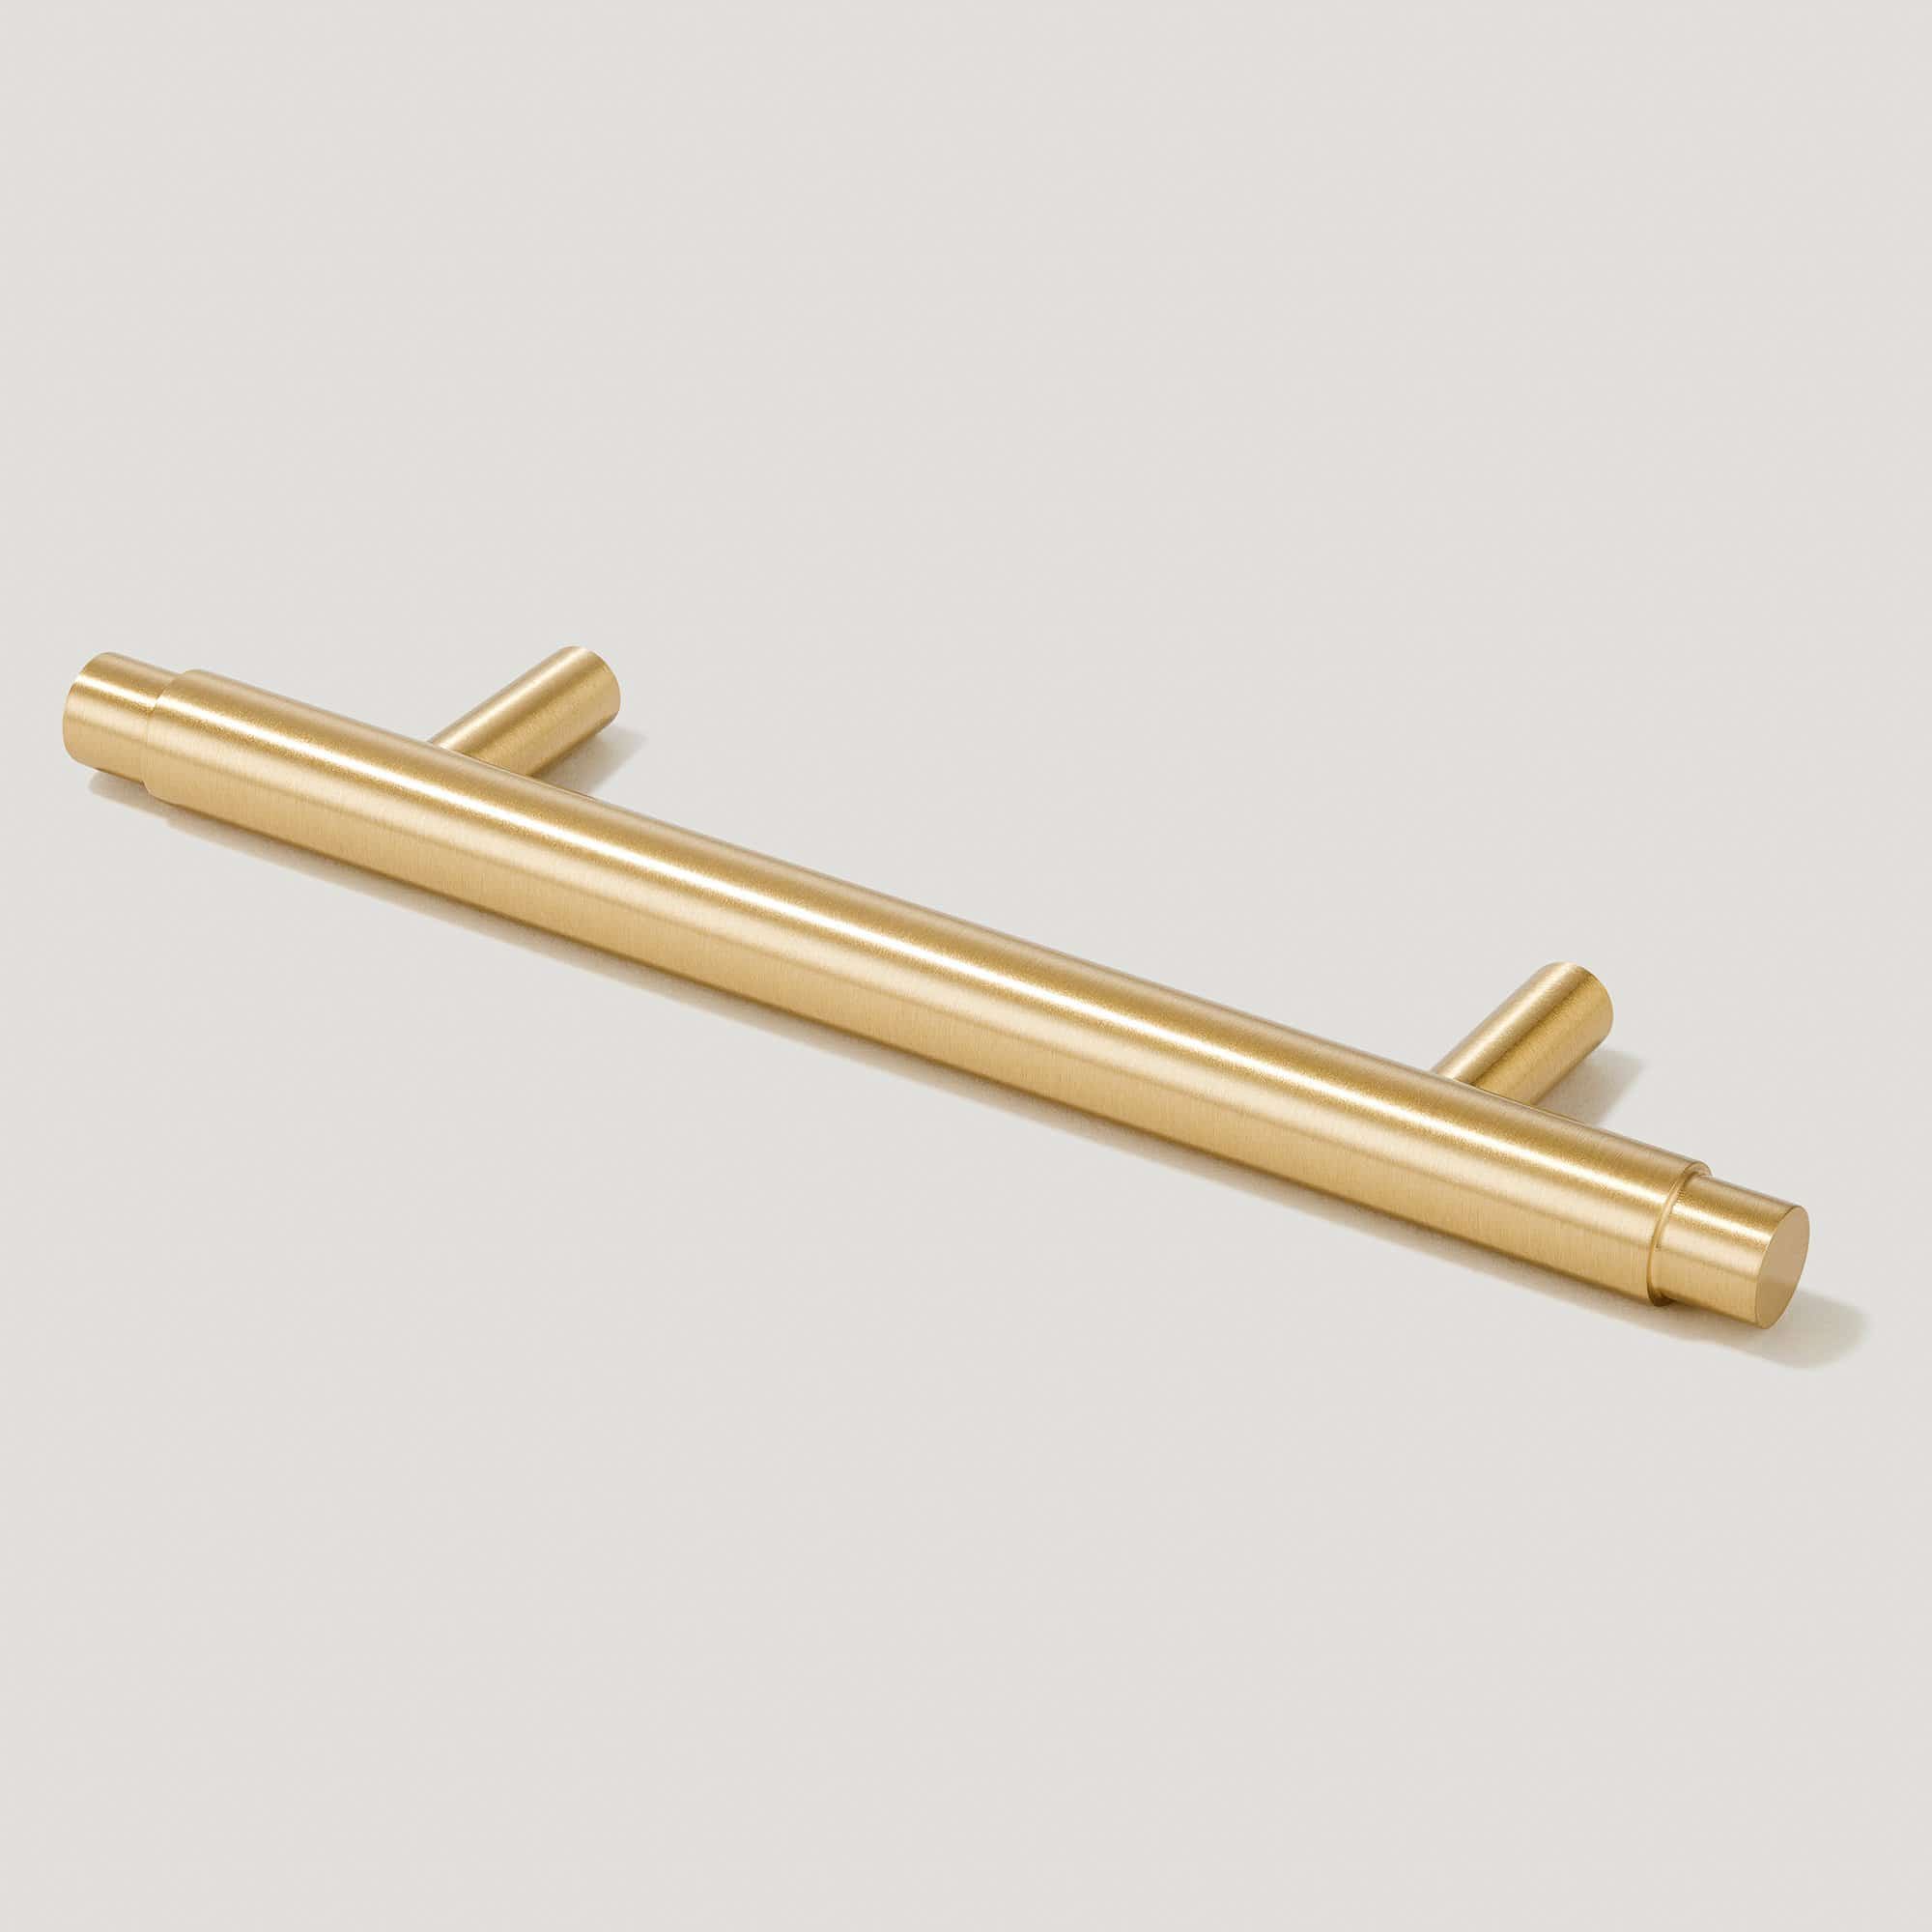 Plank Hardware Handles & Knobs 160mm (96mm screw w) ROEBUCK Smooth T-bar Handle - Solid Brass